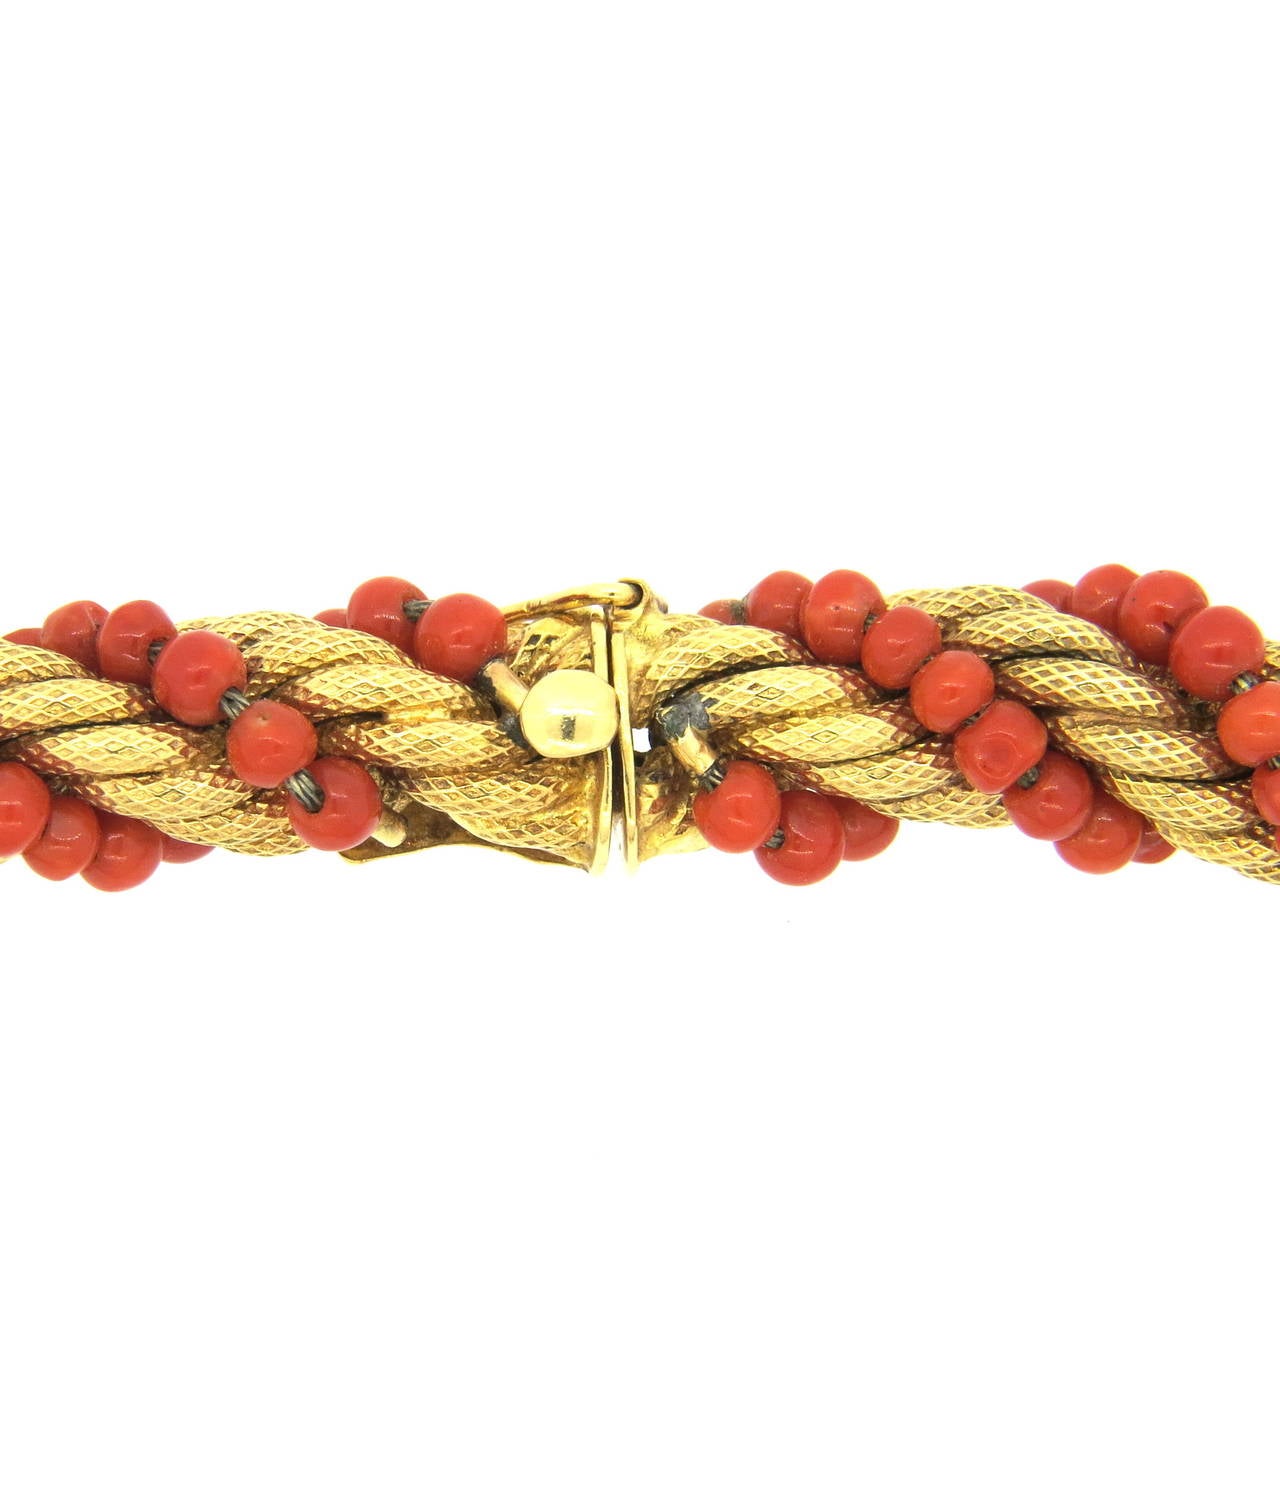 Beautiful Italian 14K gold necklace, circa 1960s, featuring coral beads in a twisted rope design. Necklace measures 16